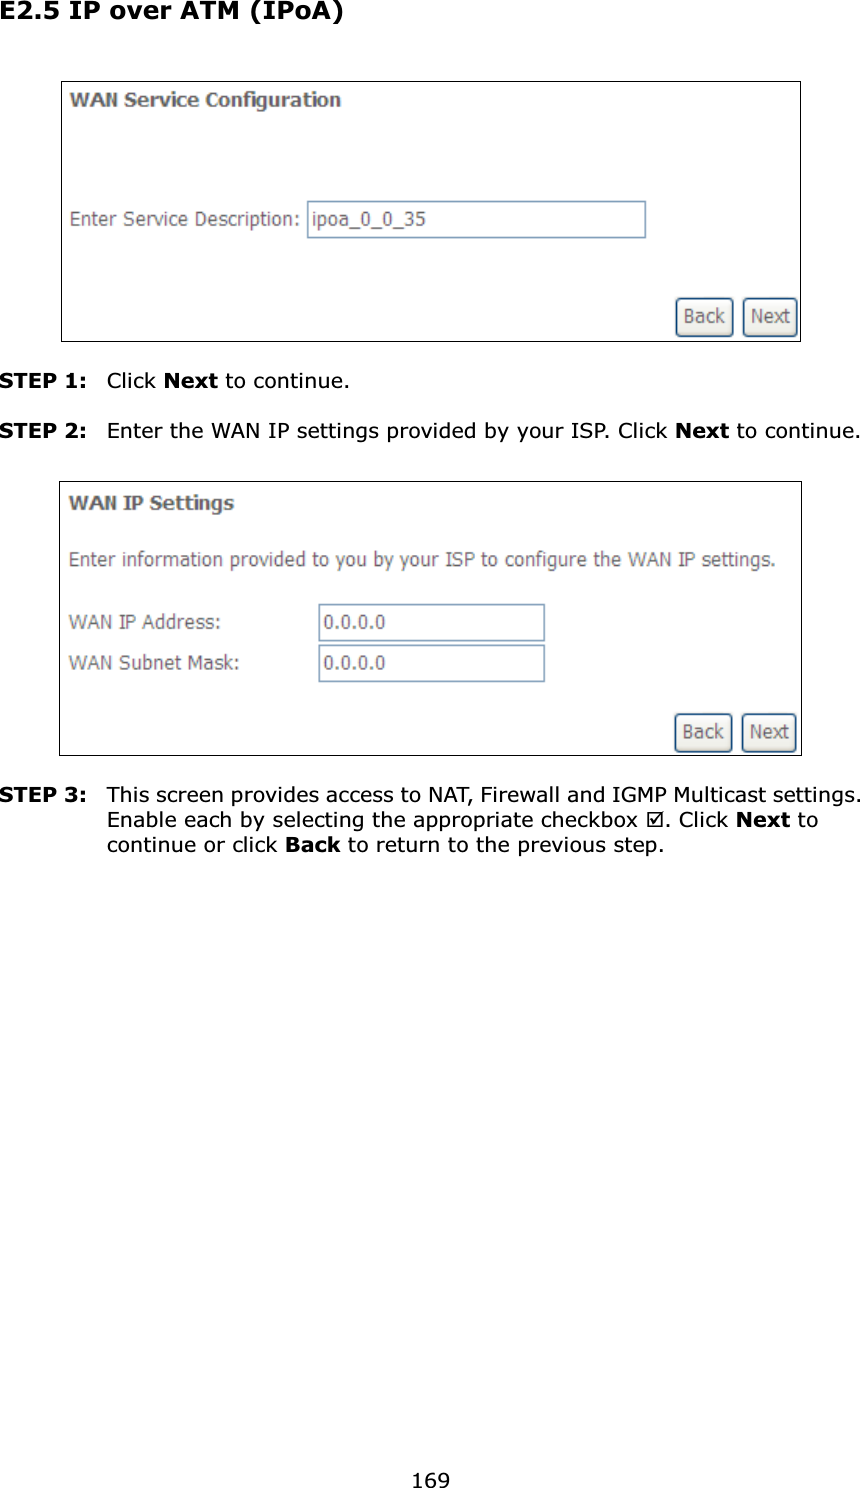 169E2.5 IP over ATM (IPoA)STEP 1: Click Next to continue.STEP 2: Enter the WAN IP settings provided by your ISP. Click Next to continue.STEP 3: This screen provides access to NAT, Firewall and IGMP Multicast settings. Enable each by selecting the appropriate checkbox ;. Click Next to continue or click Back to return to the previous step.